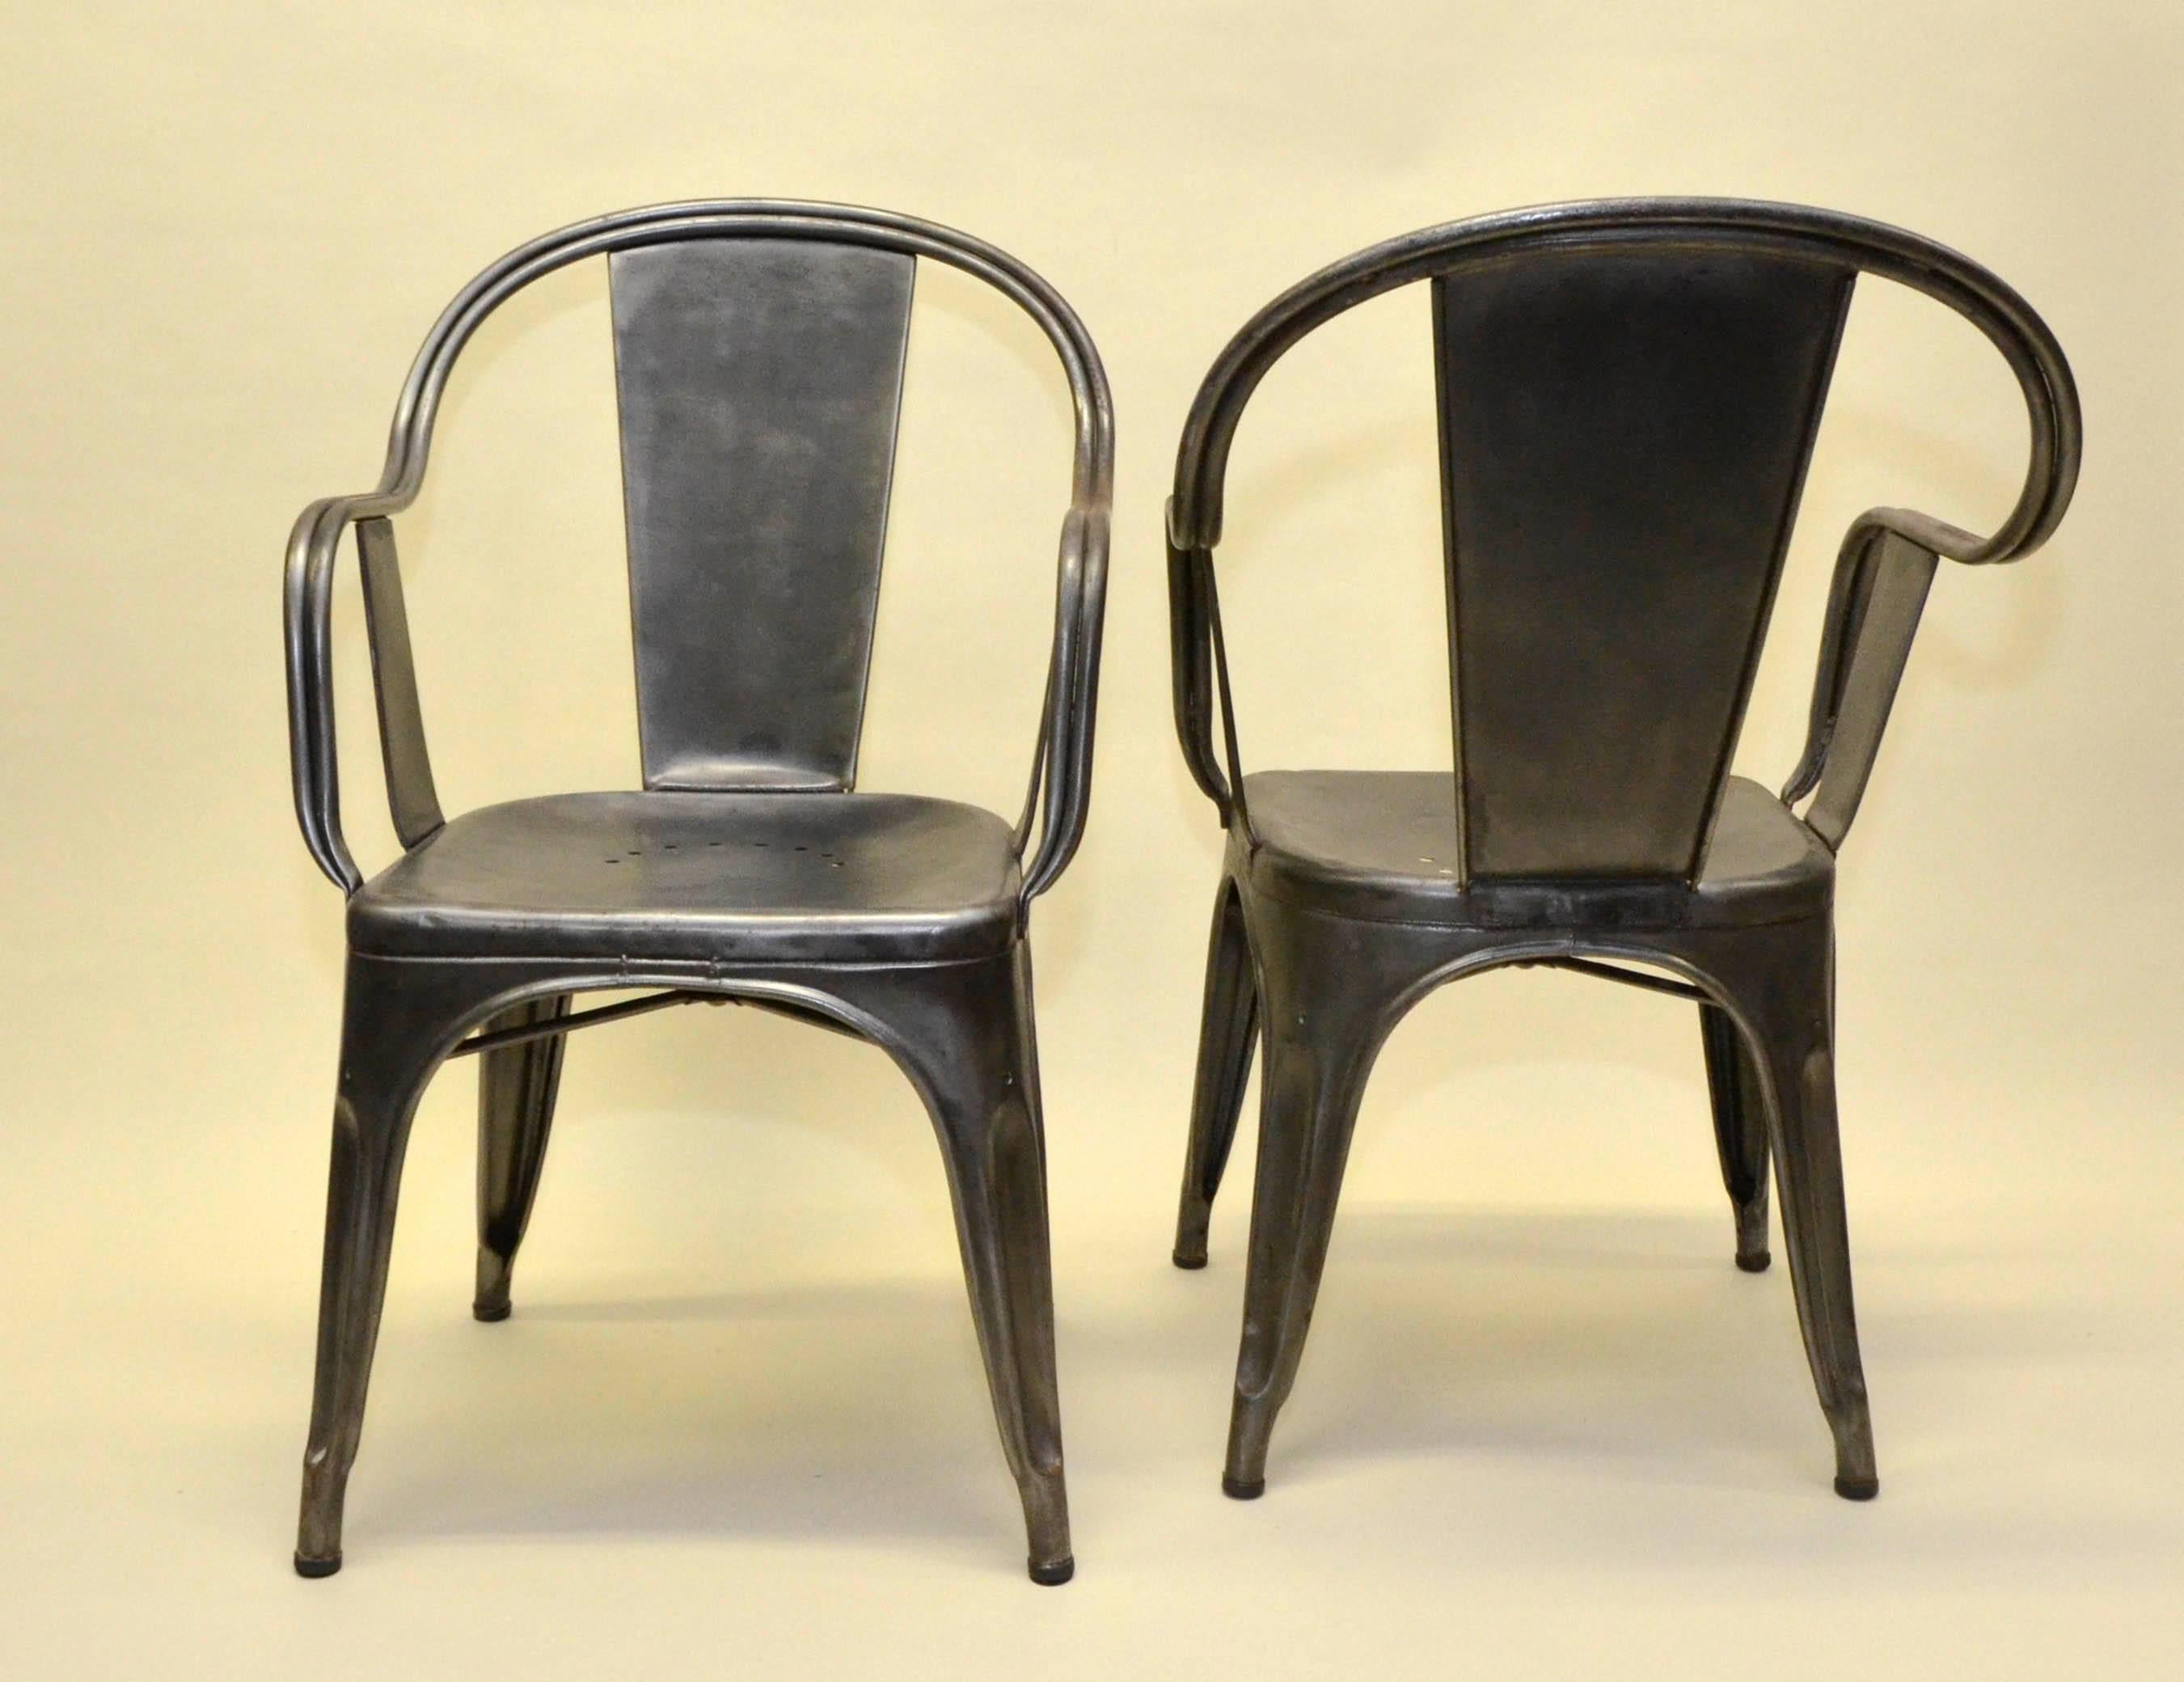 1950s pair of Tolix garden armchairs designed by Xavier Pauchard.
Originally enameled are now stripped of the coating and they can be used in interiors only.
Special feature of this armchair is the back chair realized with a double curved